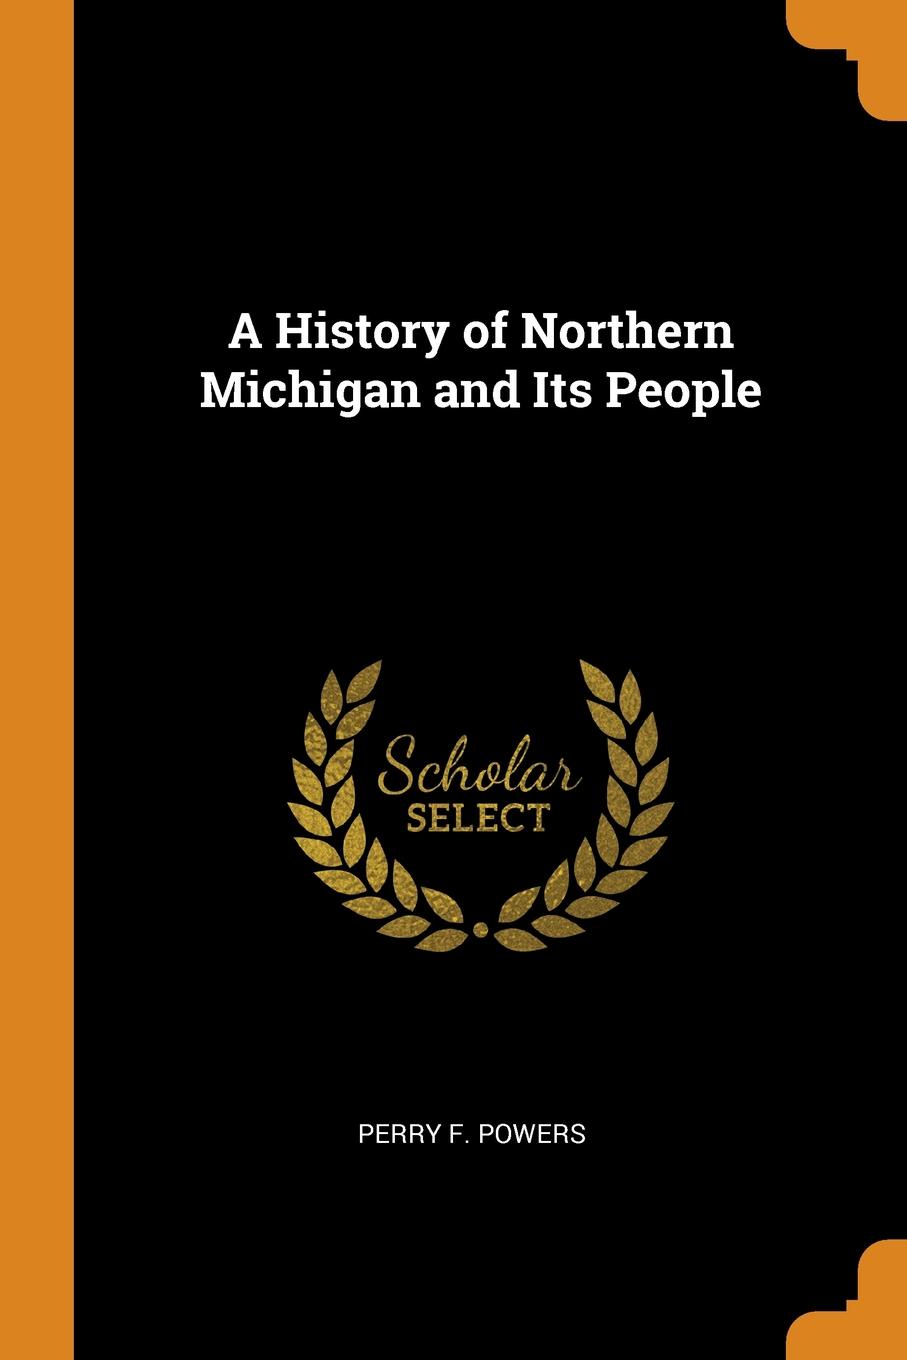 A History of Northern Michigan and Its People